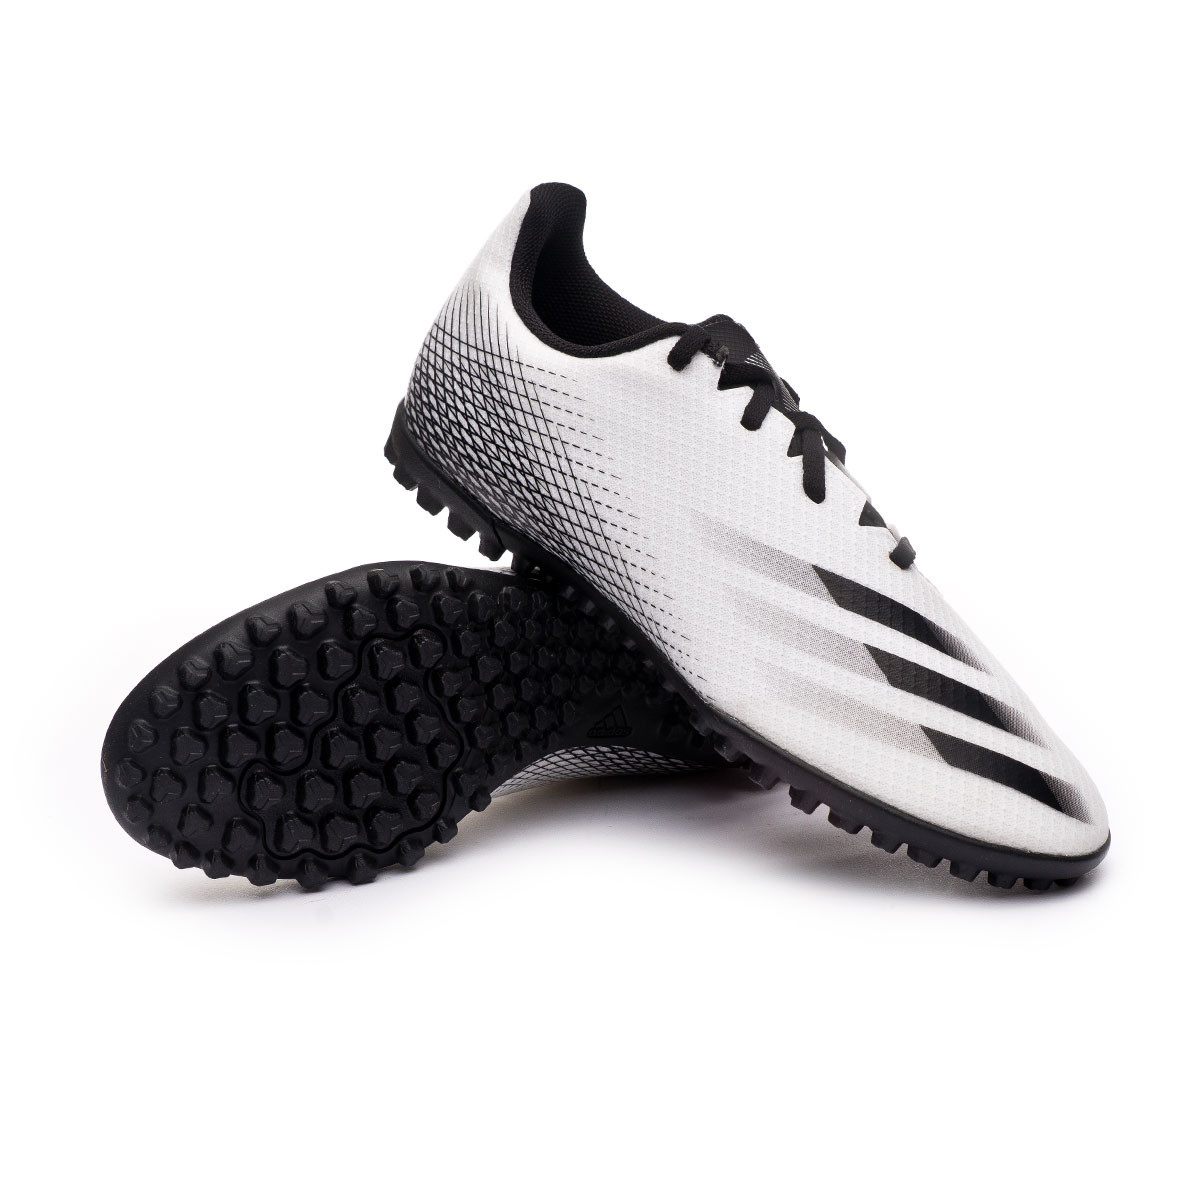 Football Boots adidas X Ghosted.4 Turf 